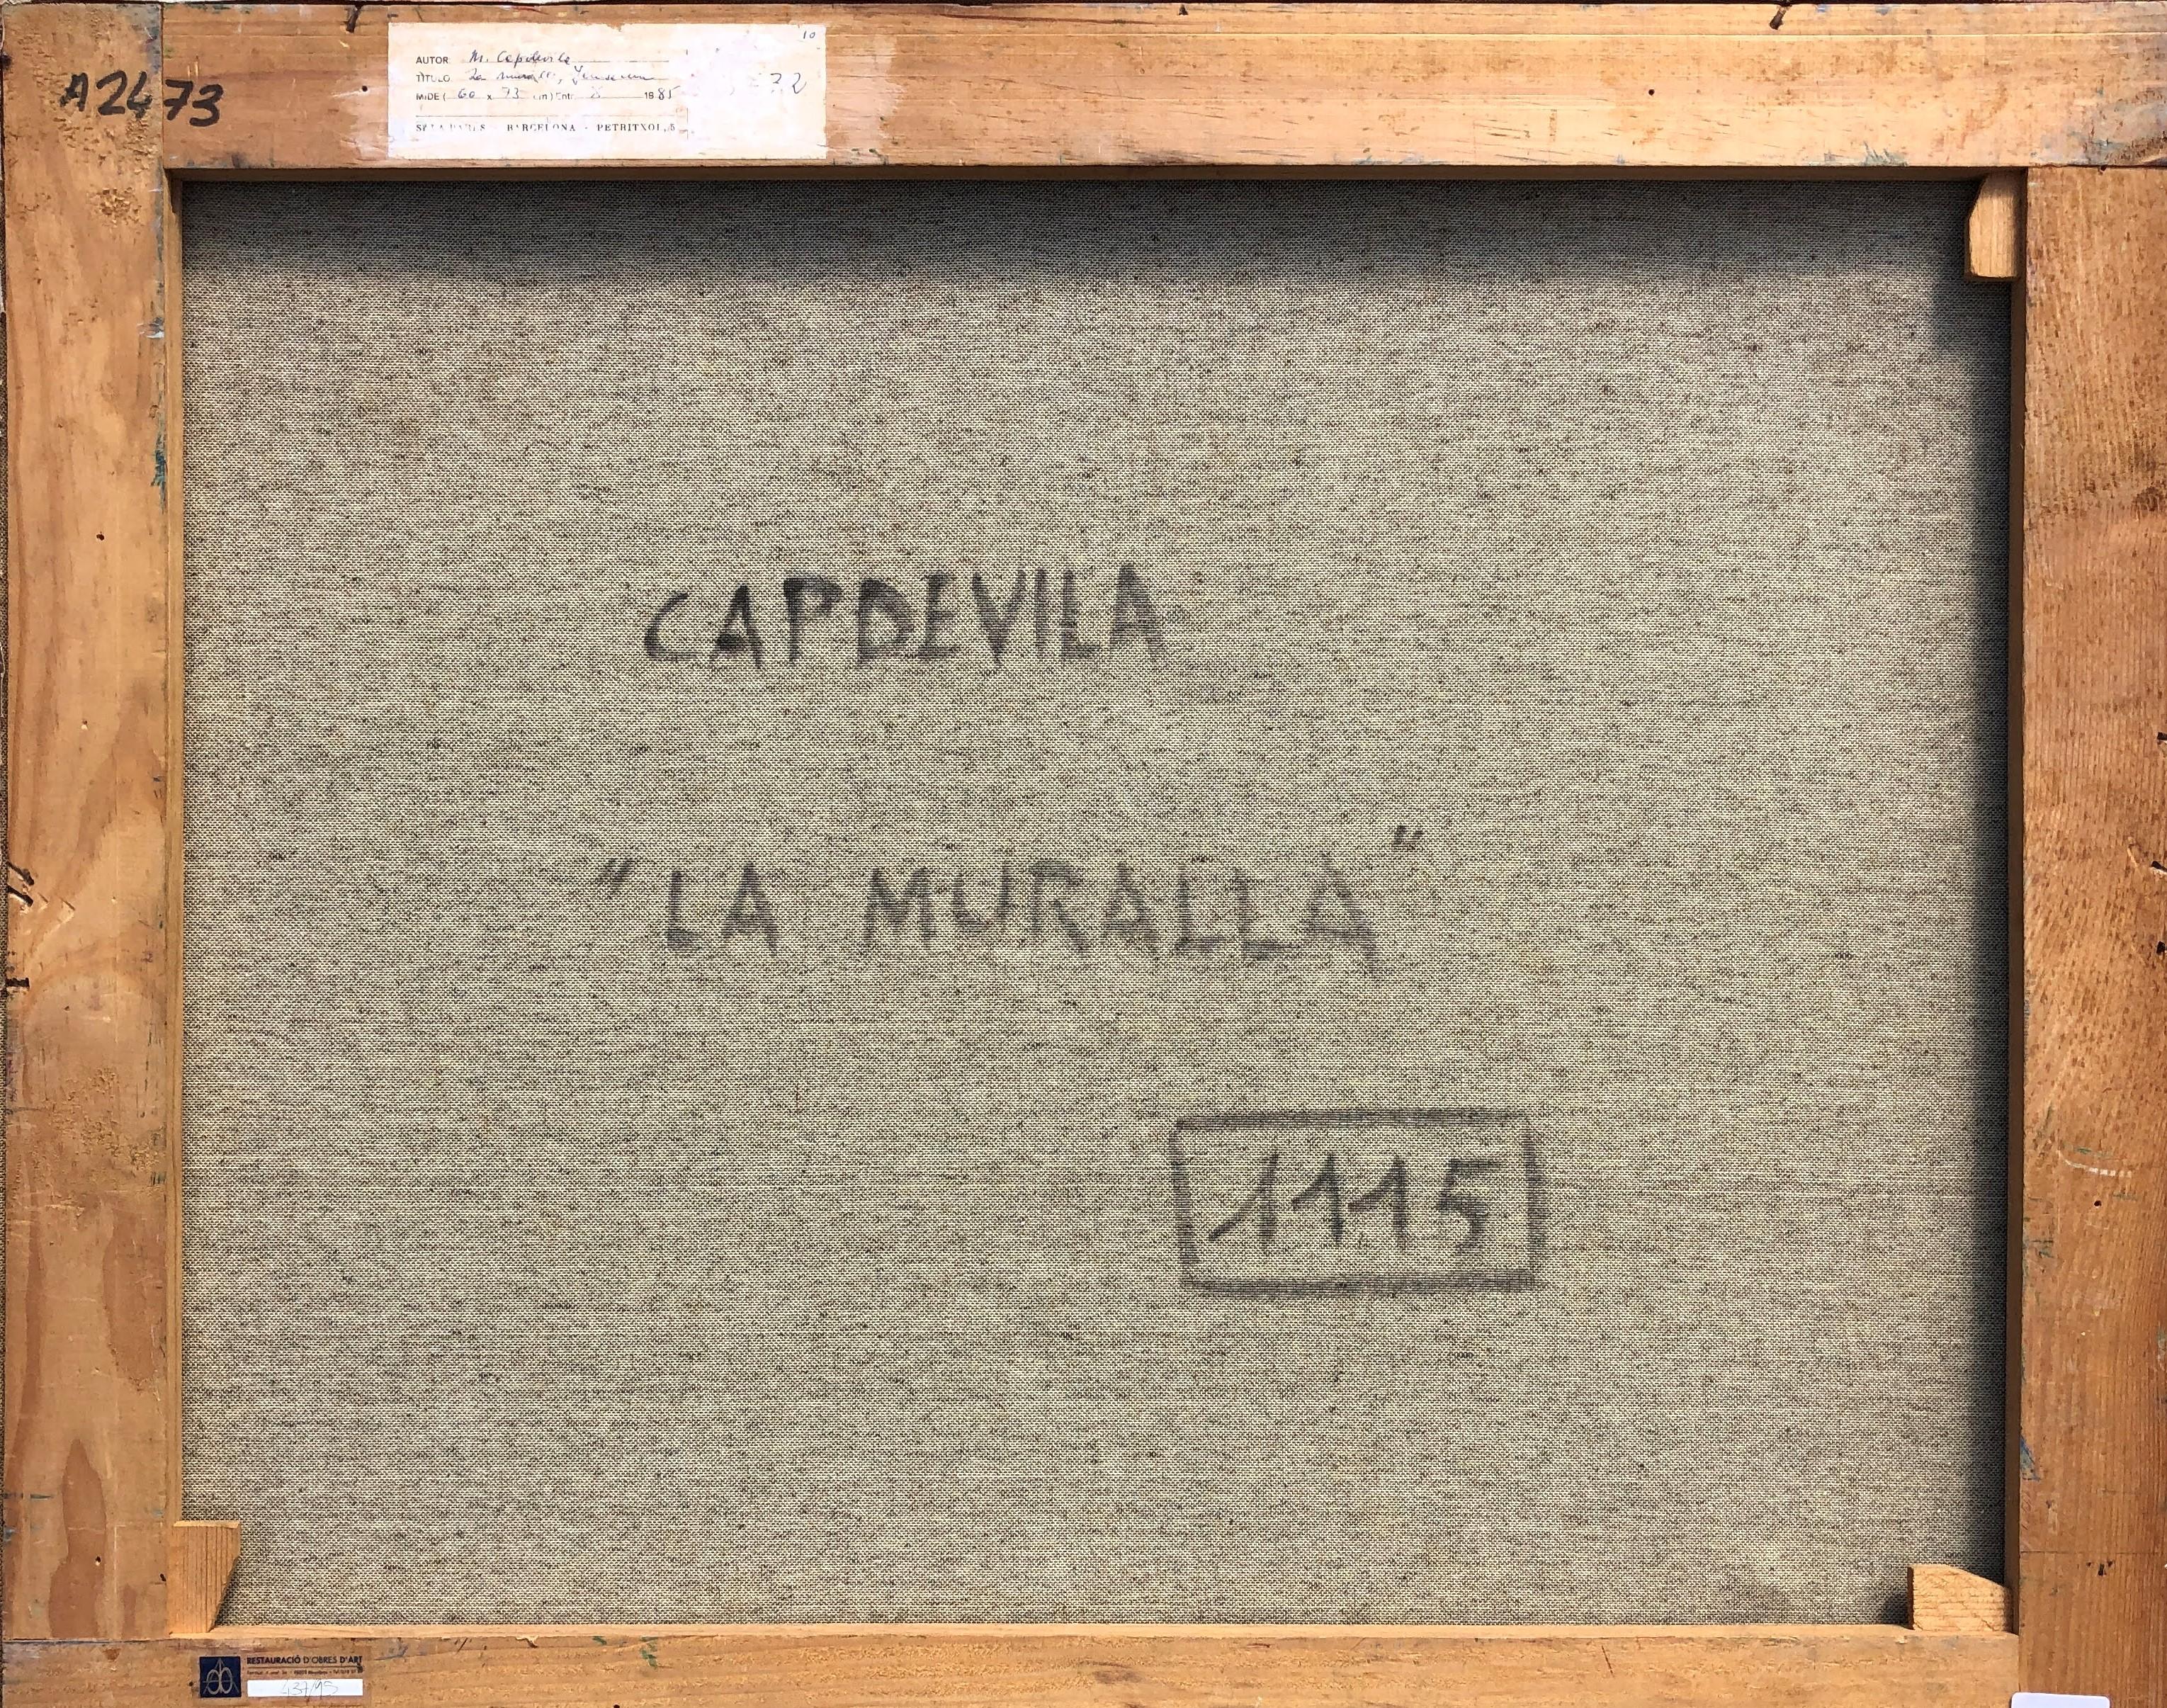 Unframed

Manuel Capdevila i Massana (Barcelona, ​​December 28, 1910 - April 18, 2006) was a Catalan painter and goldsmith, son of the goldsmith Joaquín Capdevila y Meya and father of the also goldsmith, Joaquim Capdevila y Gaya.

 

In 1950 he was